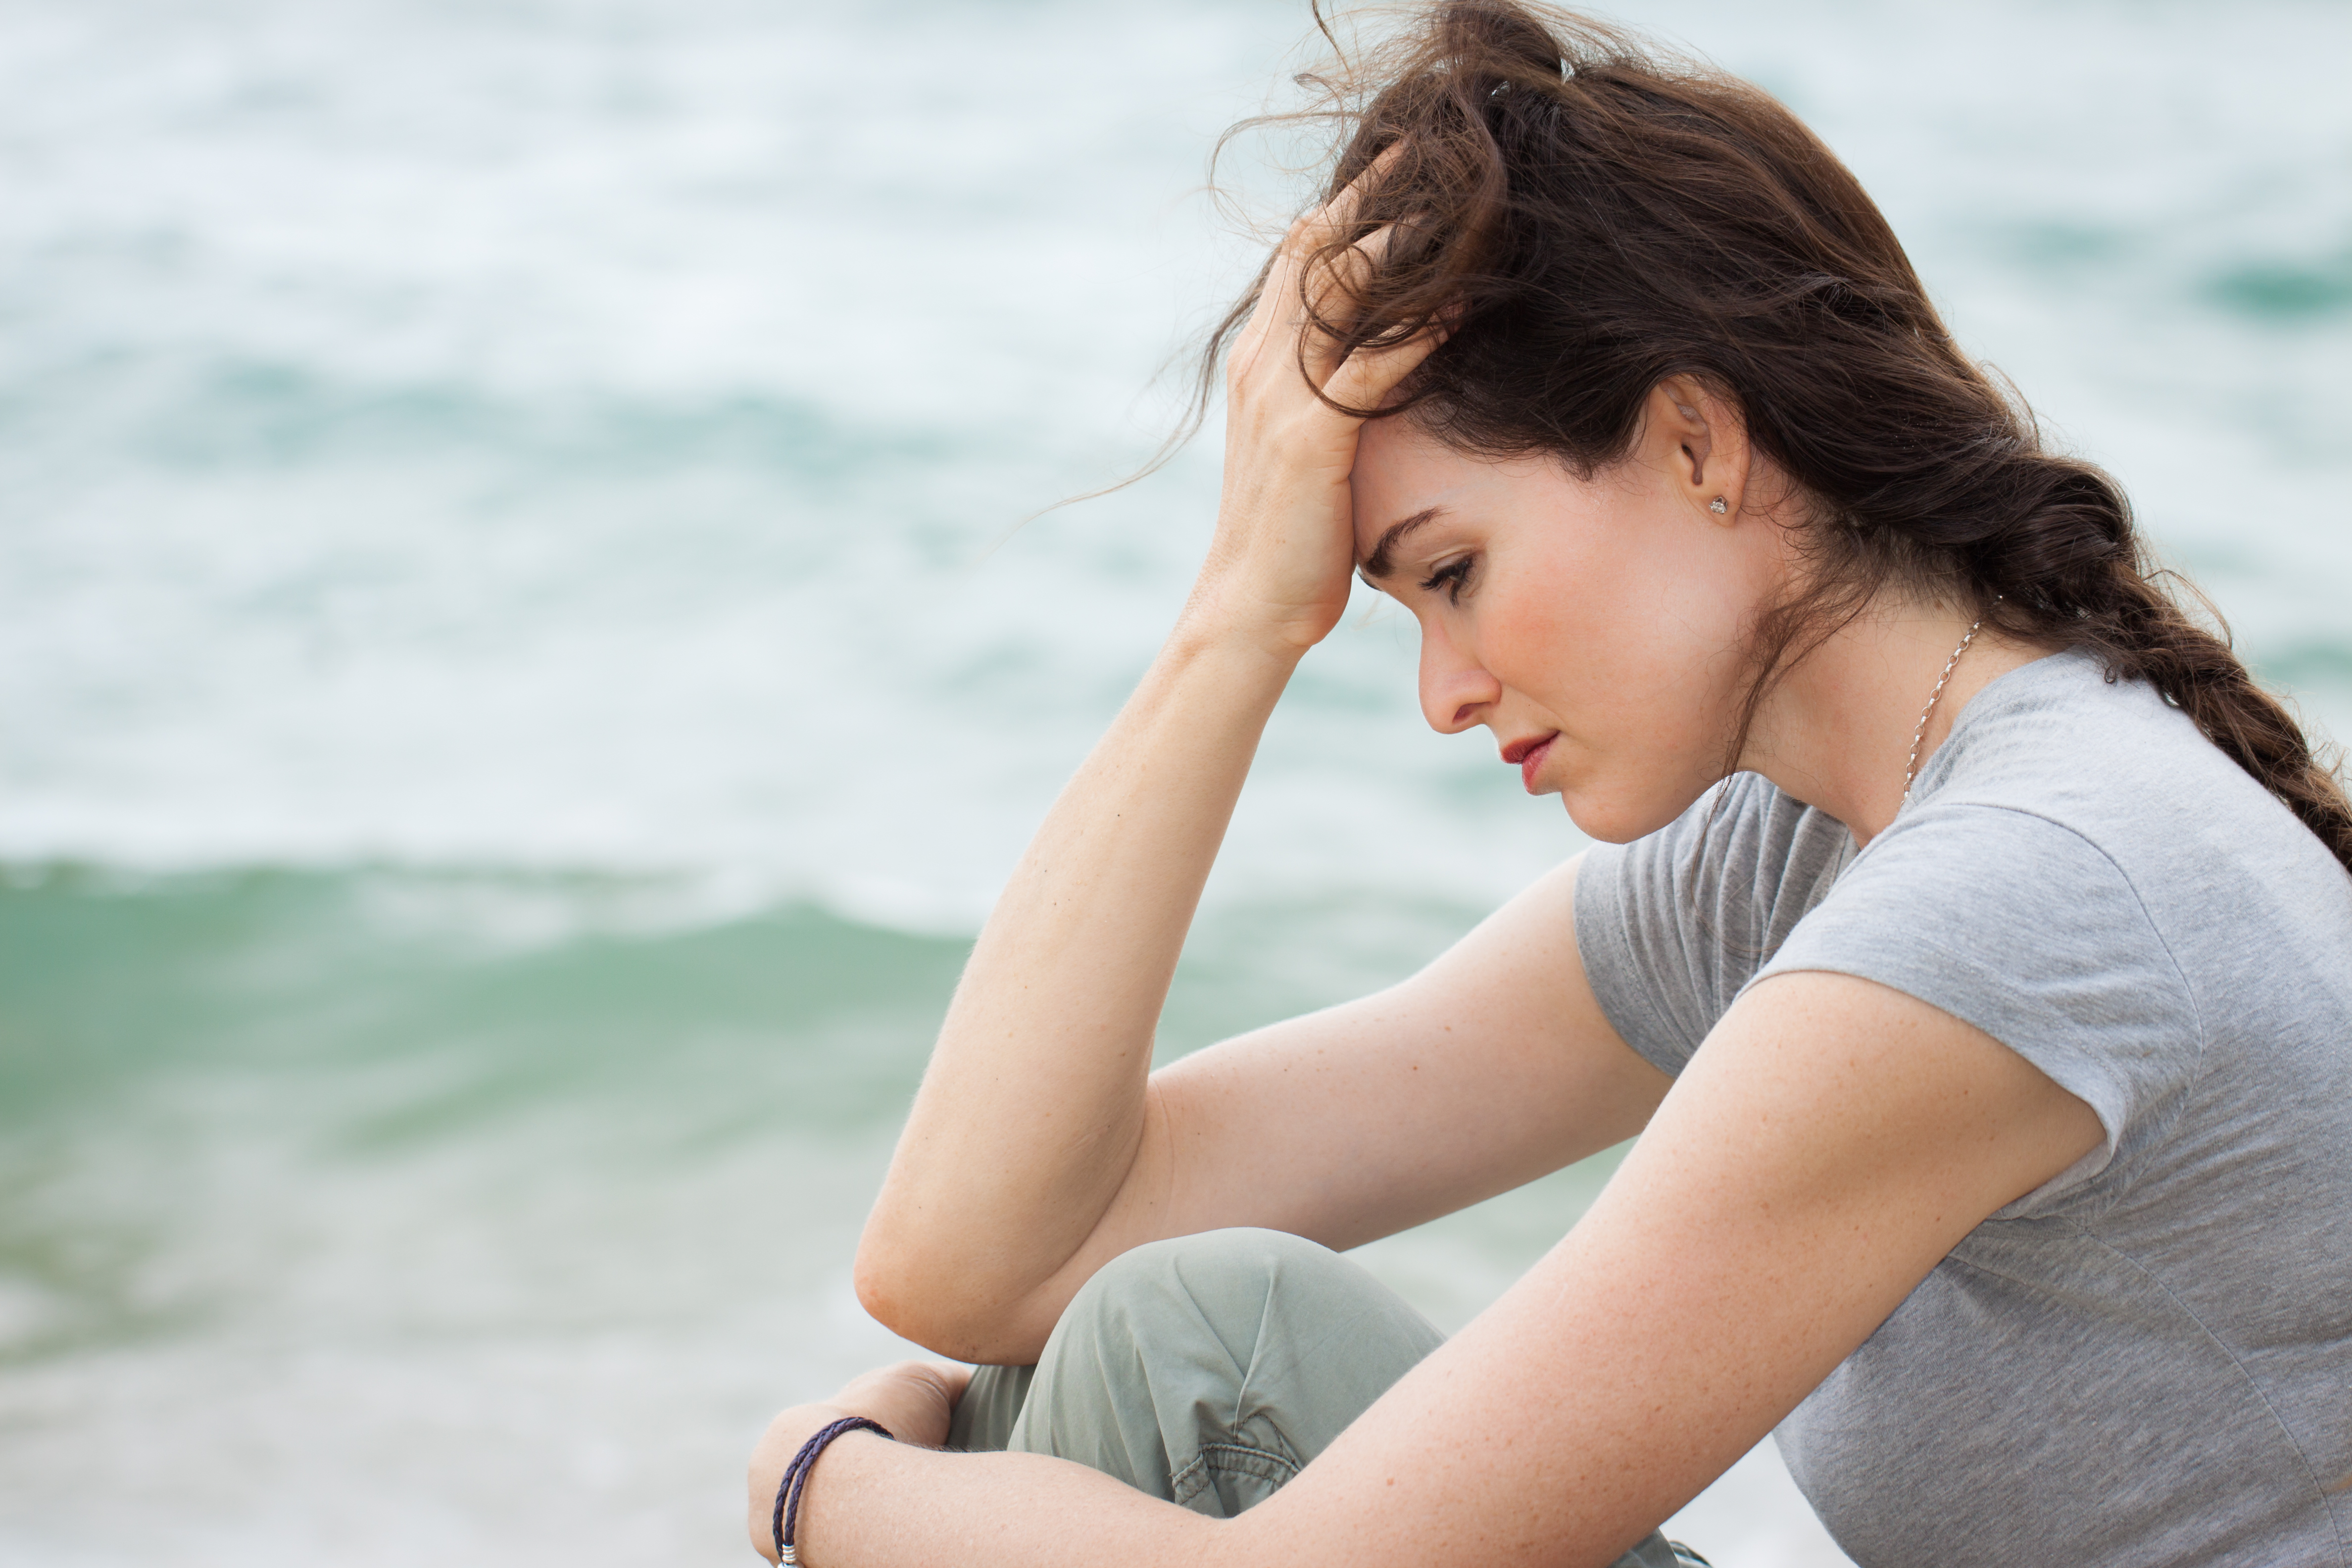 A depressed woman lost in thoughts | Source: Shutterstock